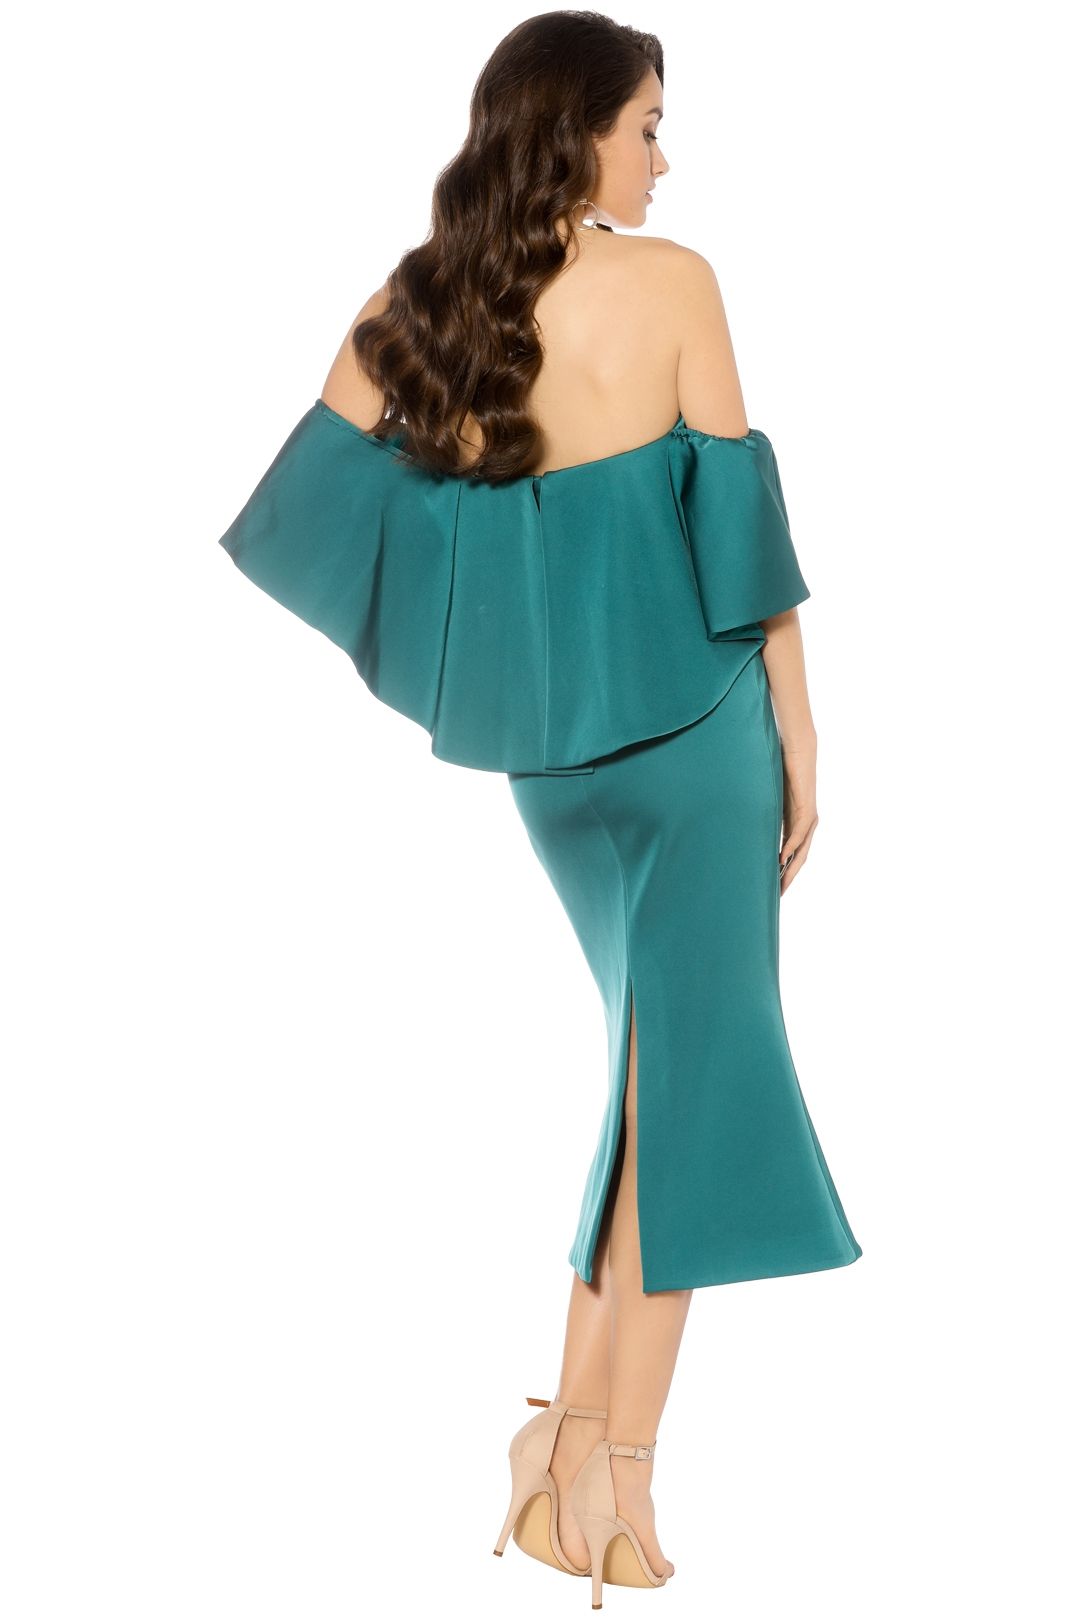 Talulah - Without You Midi - Emerald - Back - Teal